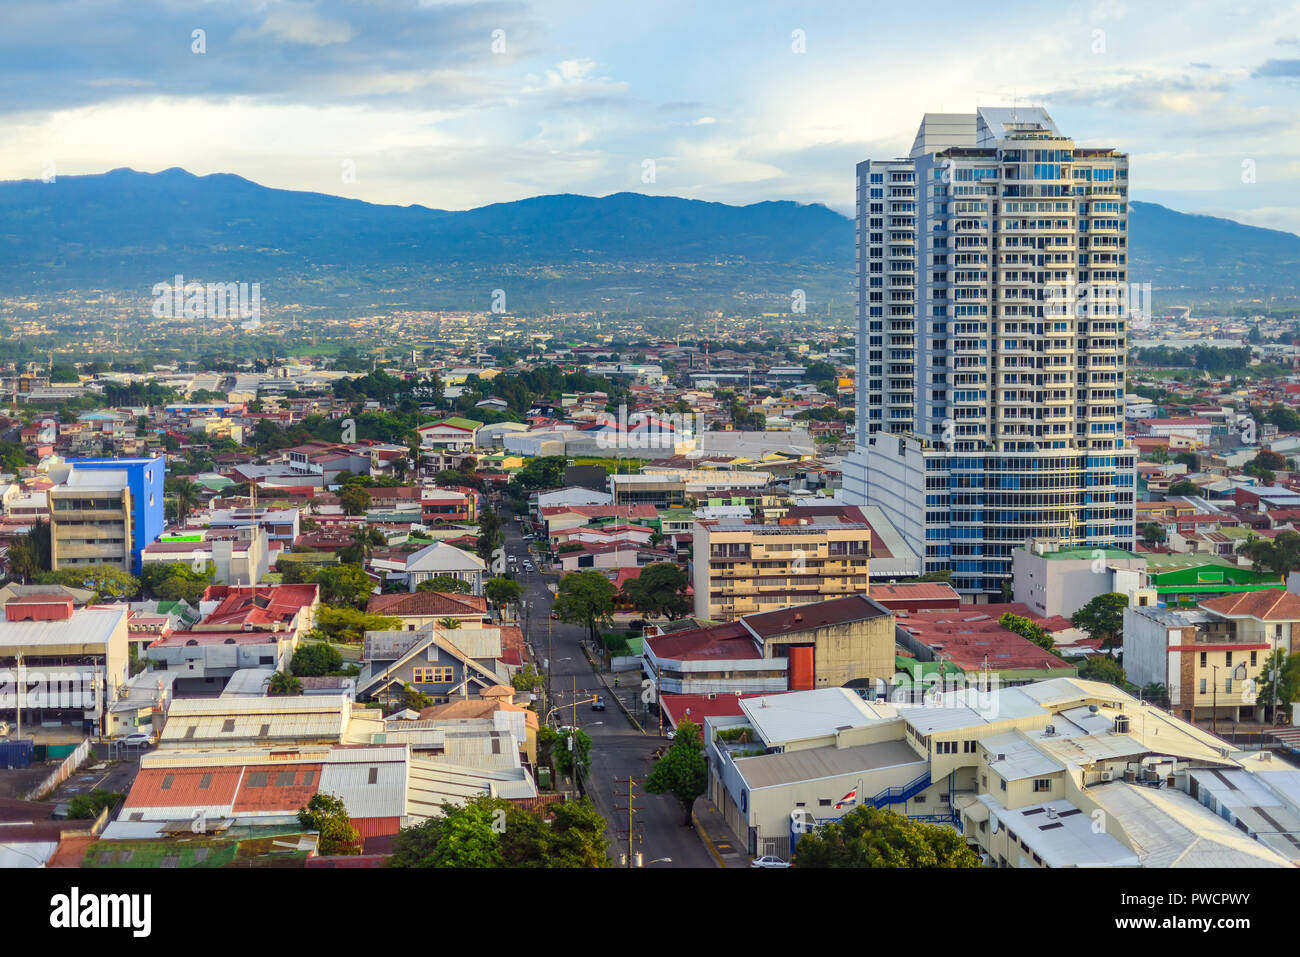 San Jose Costa rica capital city street view with mountains in the back Stock Photo